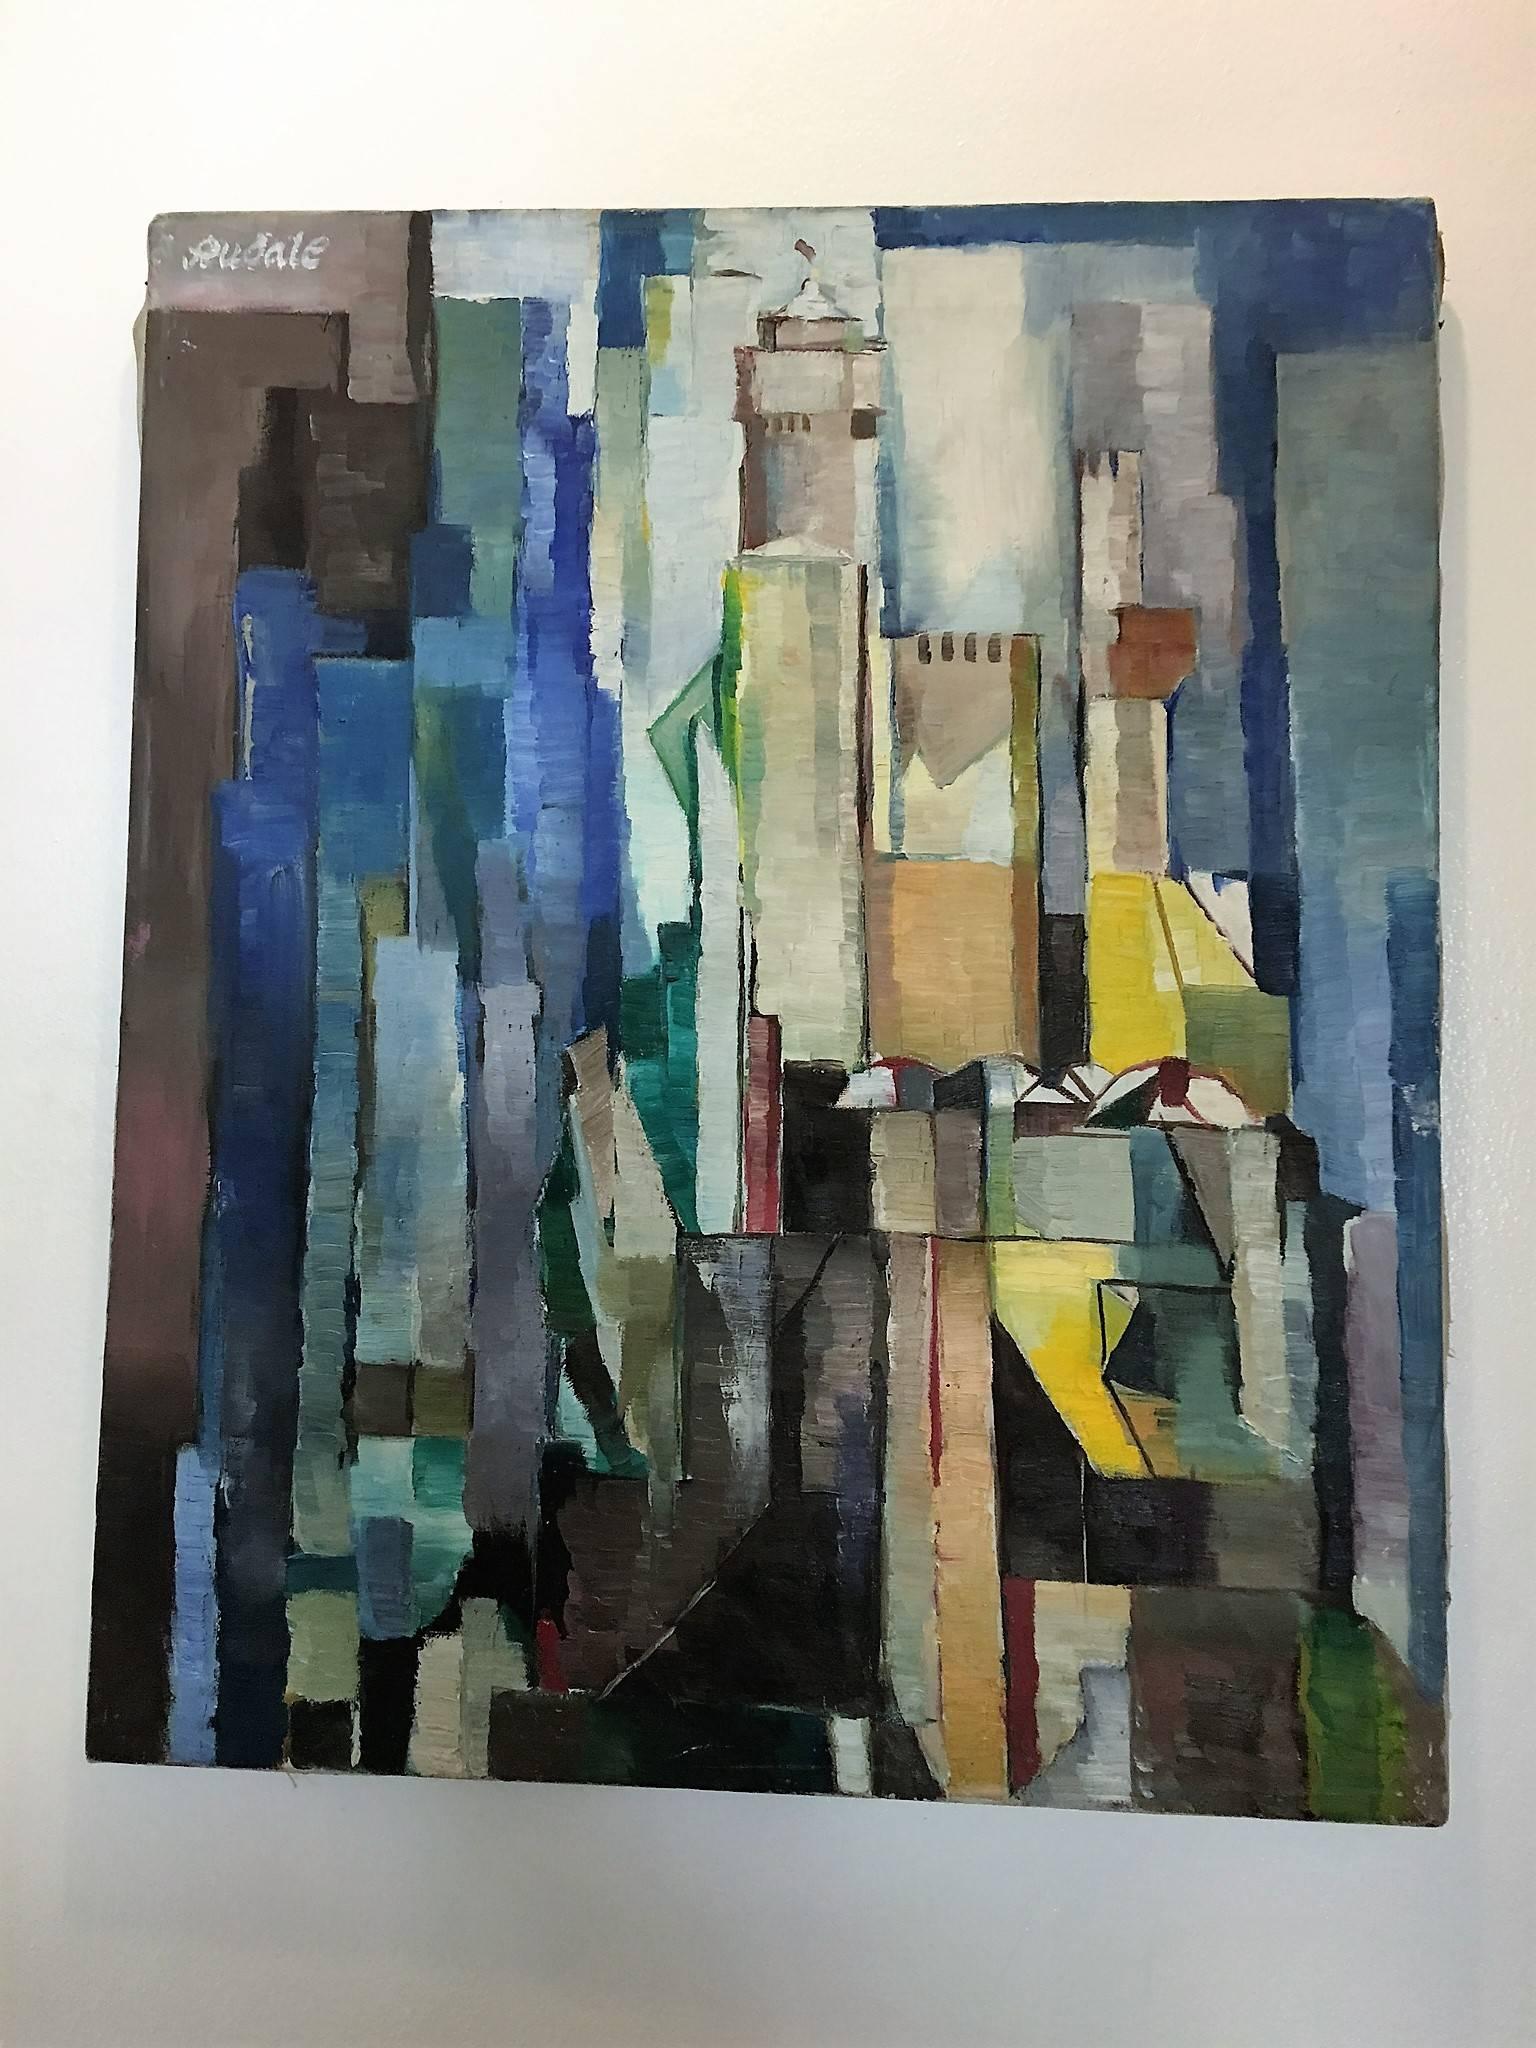 Cool abstract execution of an oil painting on canvas depicting cubistic modernist architecture in the 1940s.Signed in the upper left corner 'Rudale'.